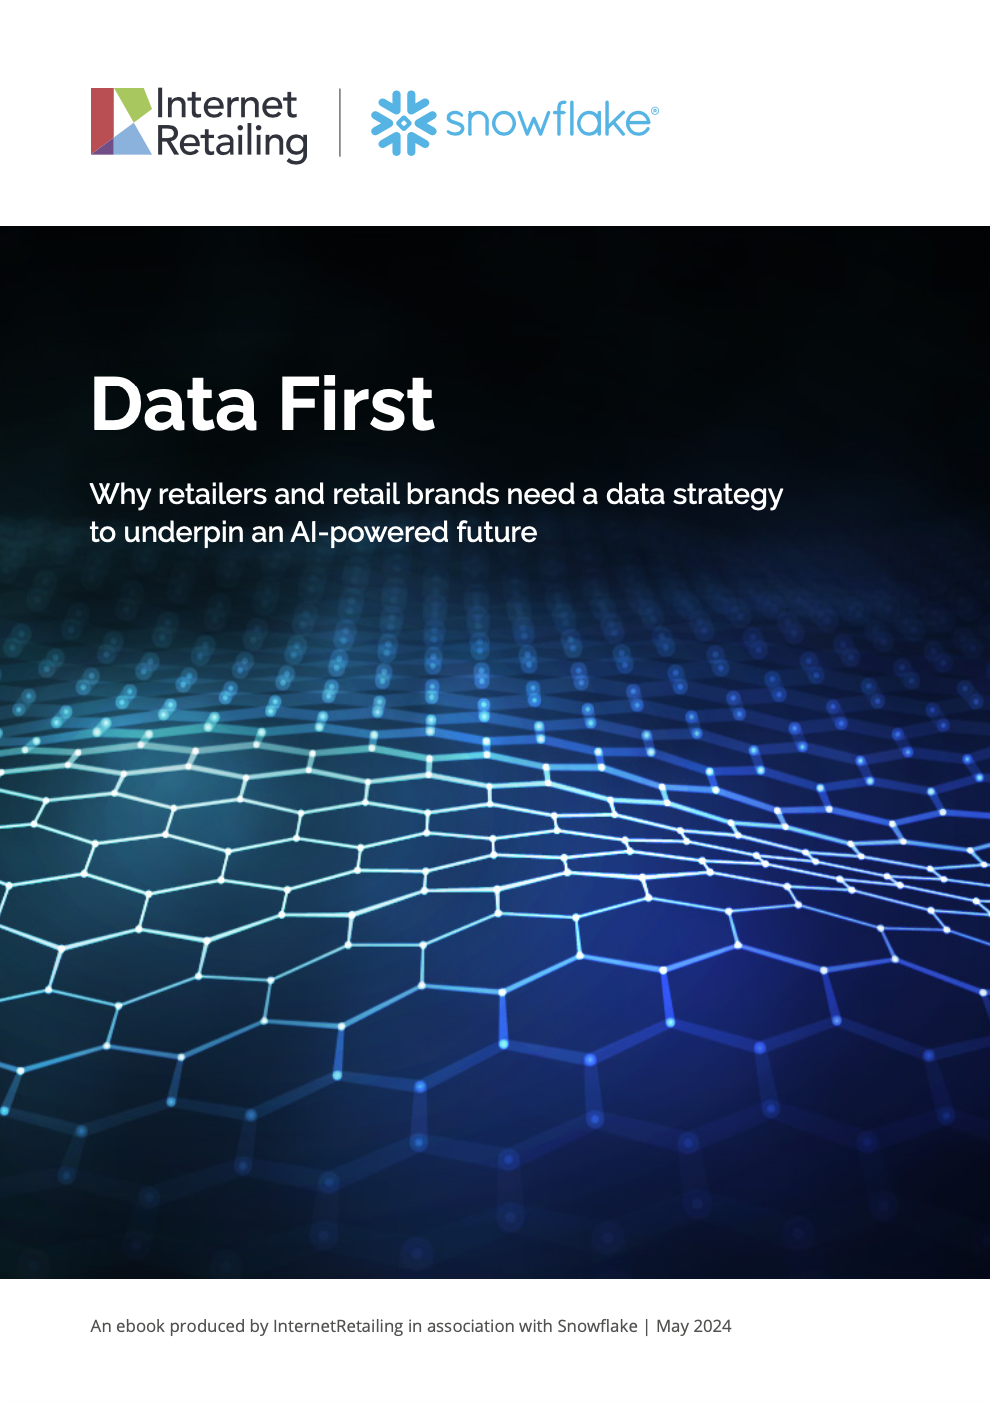 Snowflake Data first cover